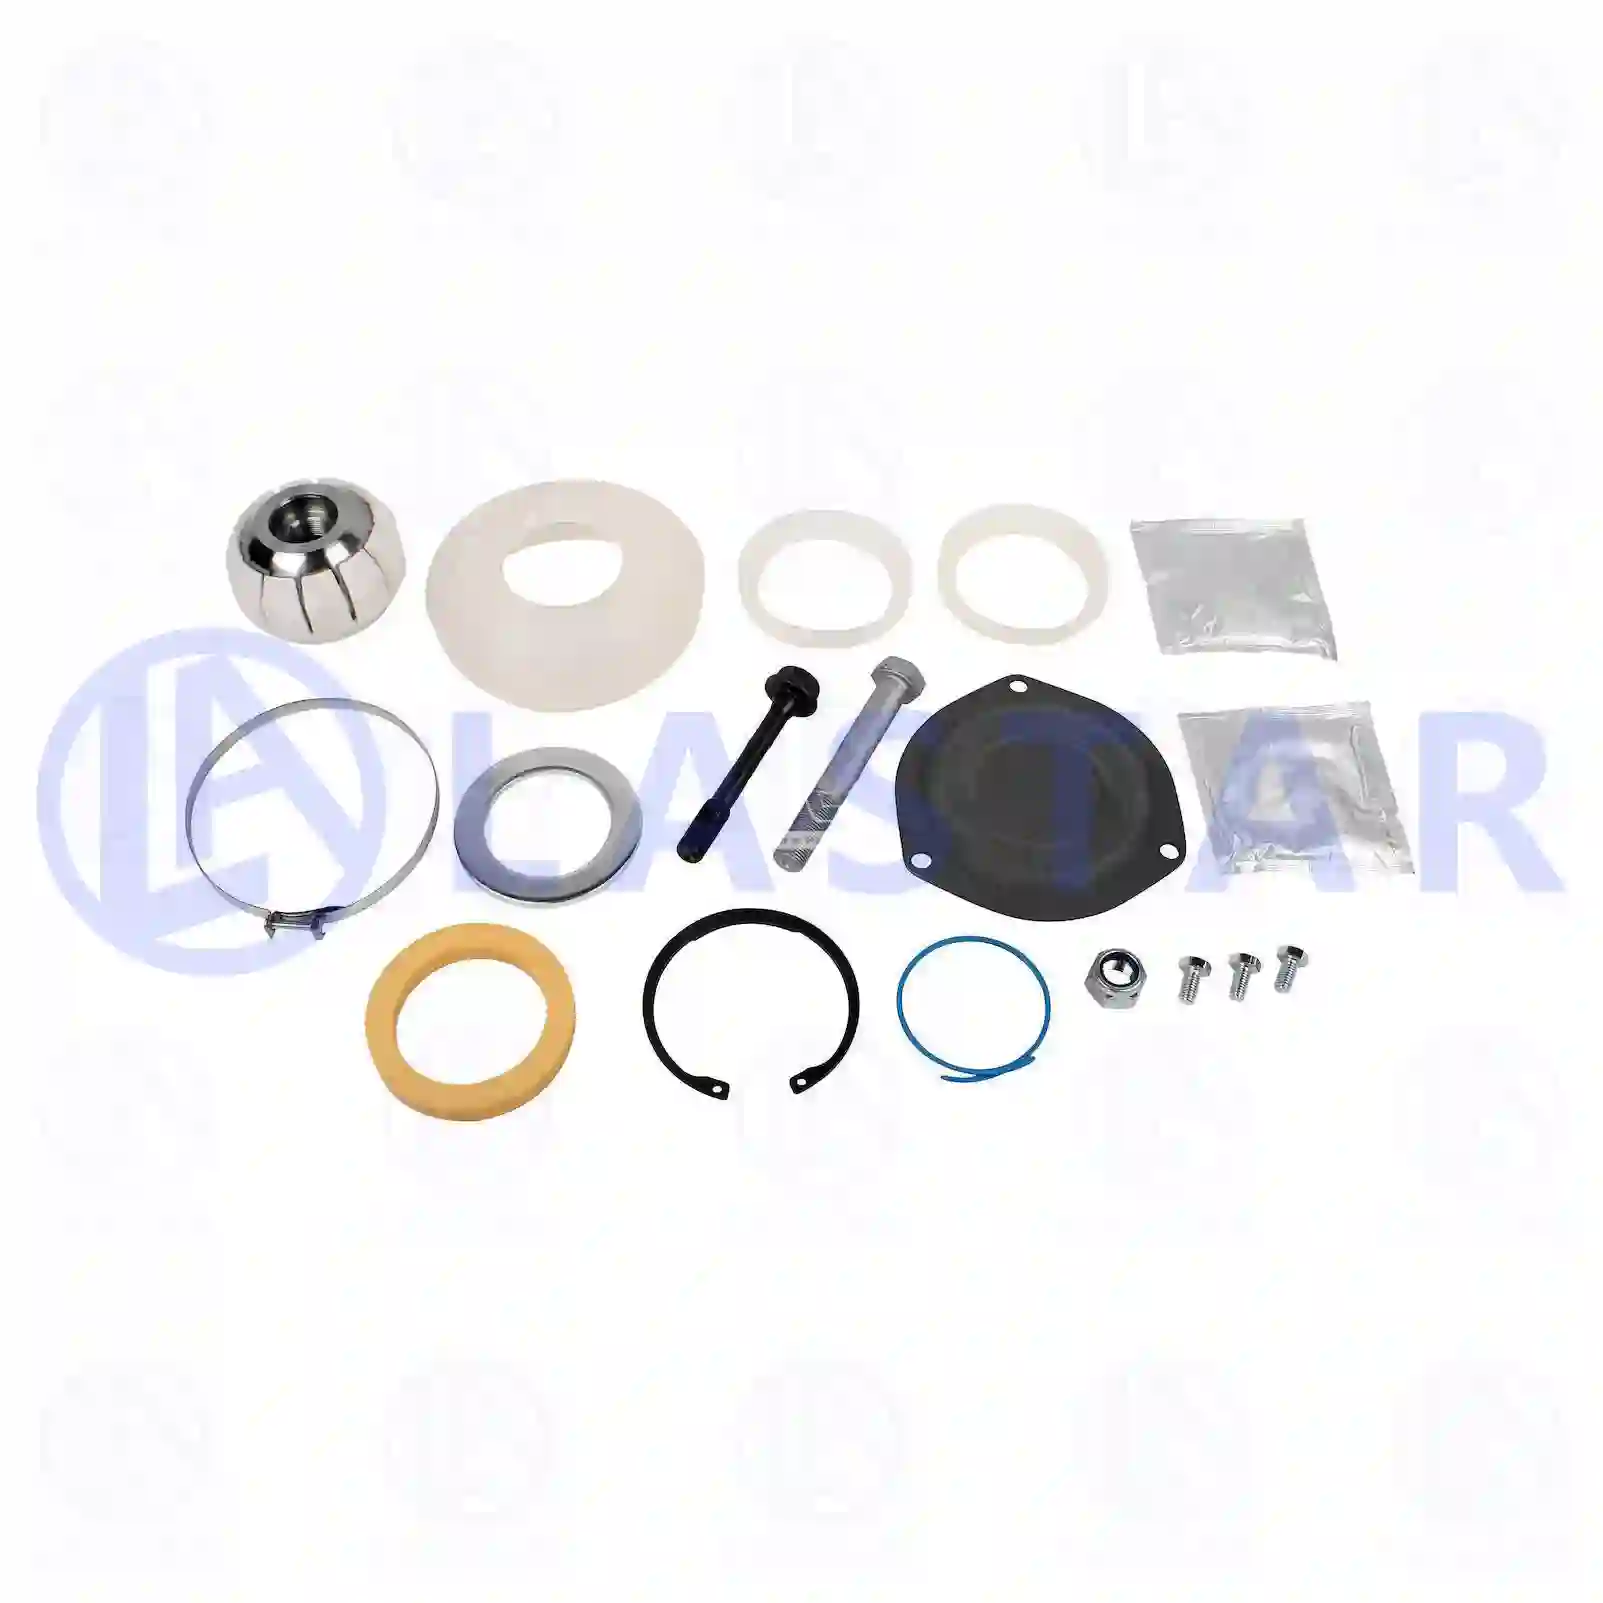 Repair kit, v-stay, 77728419, 0003500405, 0005860135, 0005861833 ||  77728419 Lastar Spare Part | Truck Spare Parts, Auotomotive Spare Parts Repair kit, v-stay, 77728419, 0003500405, 0005860135, 0005861833 ||  77728419 Lastar Spare Part | Truck Spare Parts, Auotomotive Spare Parts